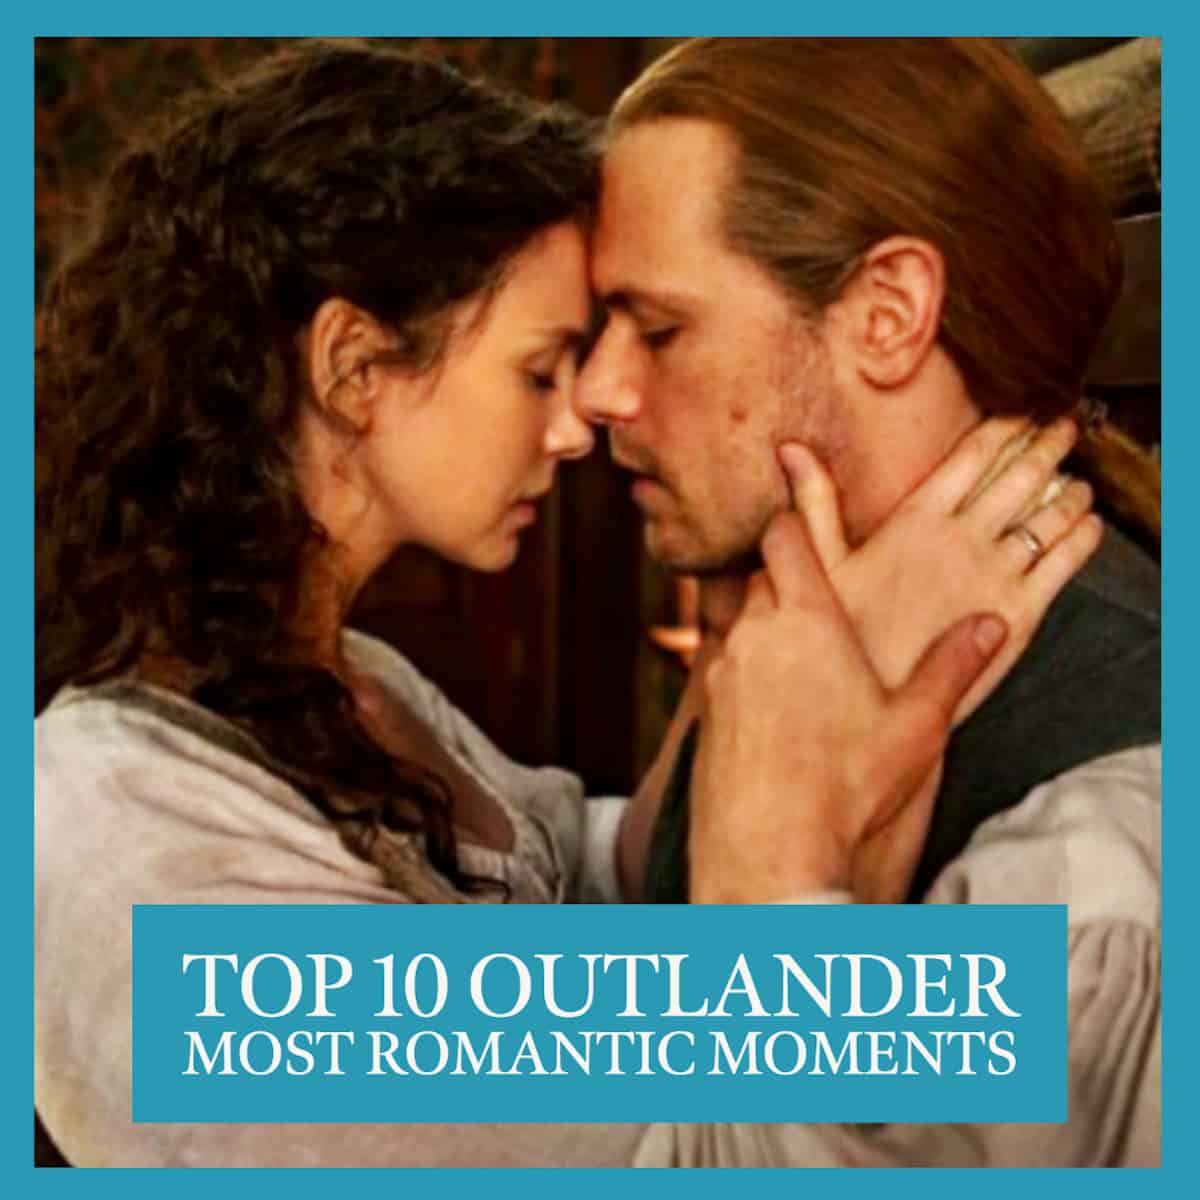 Top 10 Outlander Most Romantic Moments with Jamie and Claire